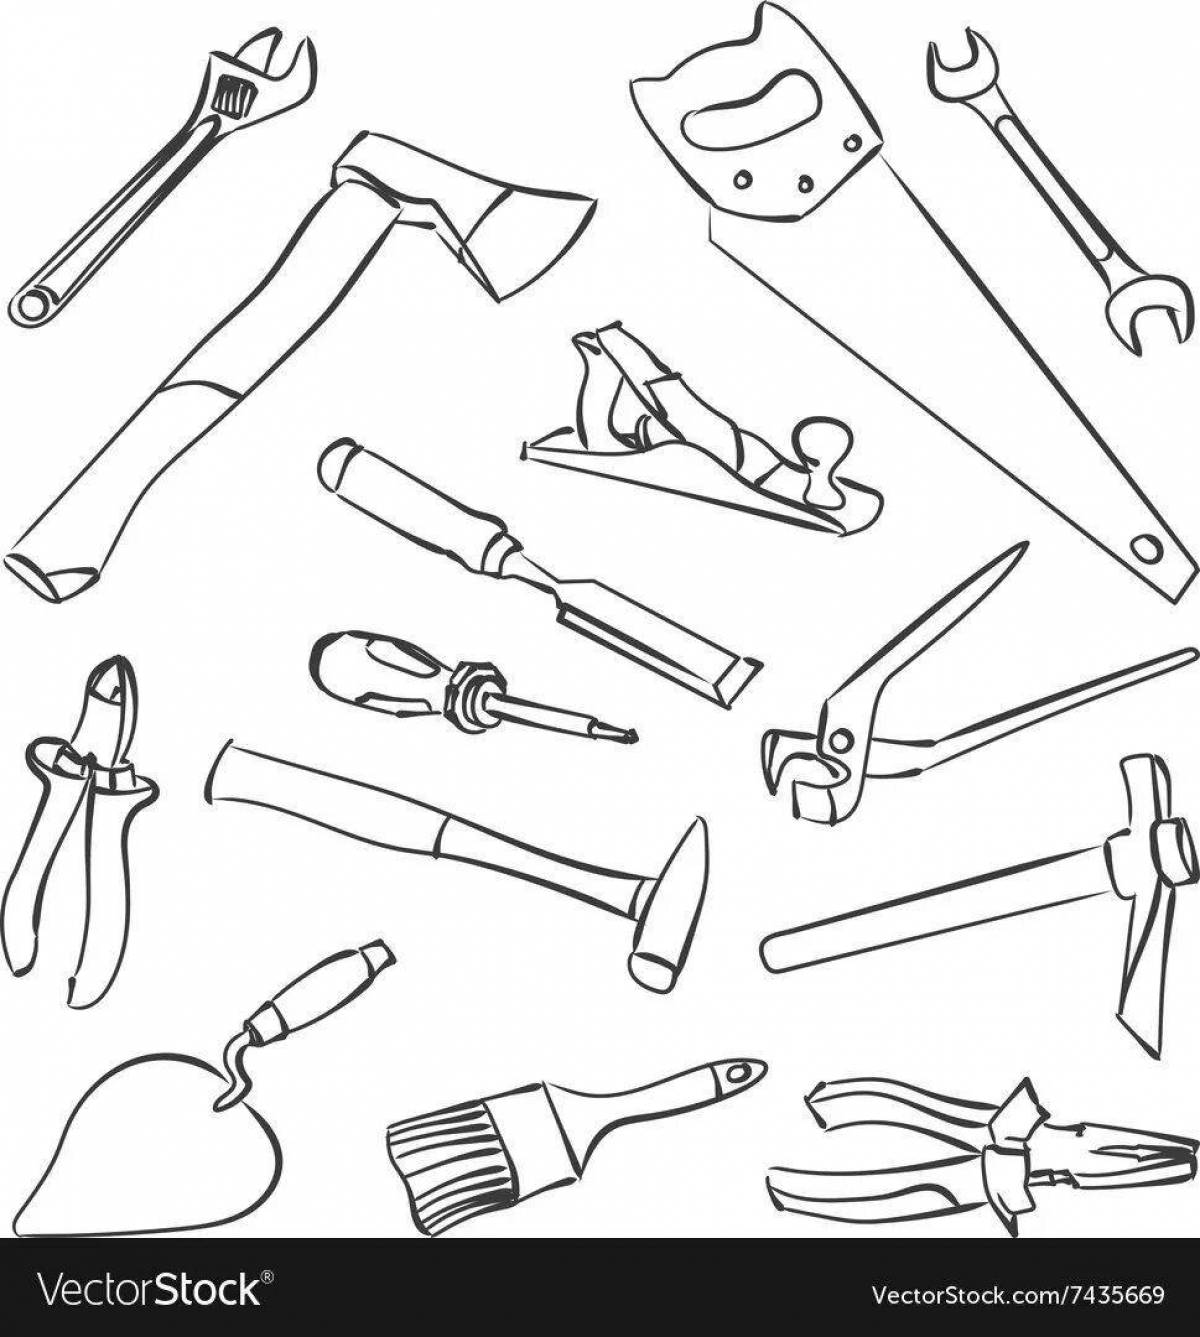 Dazzling instruments coloring page